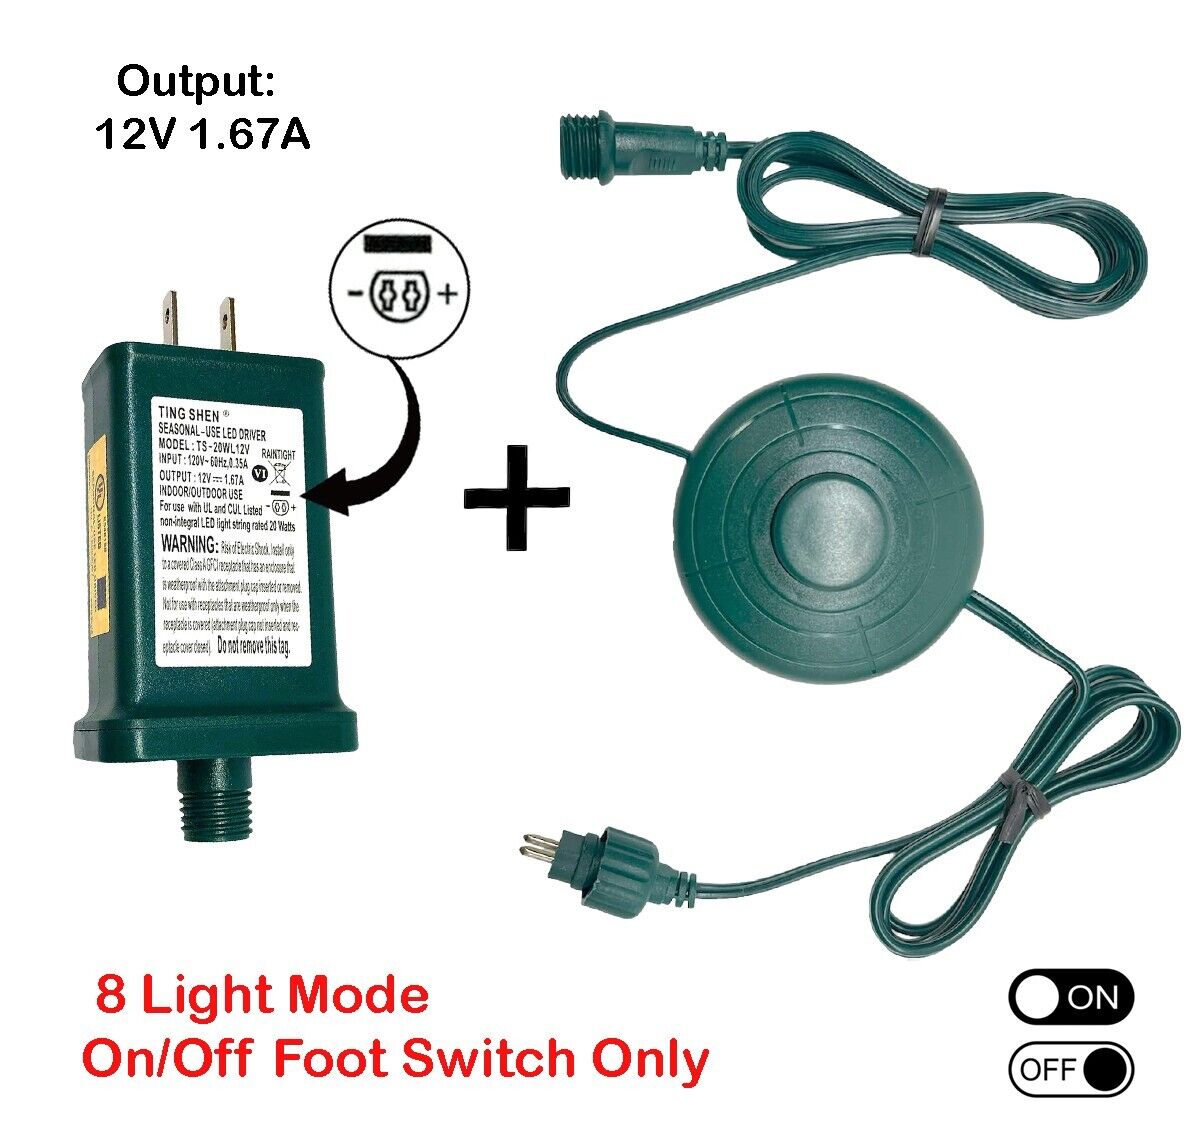 Set Adapter DC 12V 1.67A + Power Cord Foot Switch 1/2in Plug 6Ft - 8 LIGHT MODE